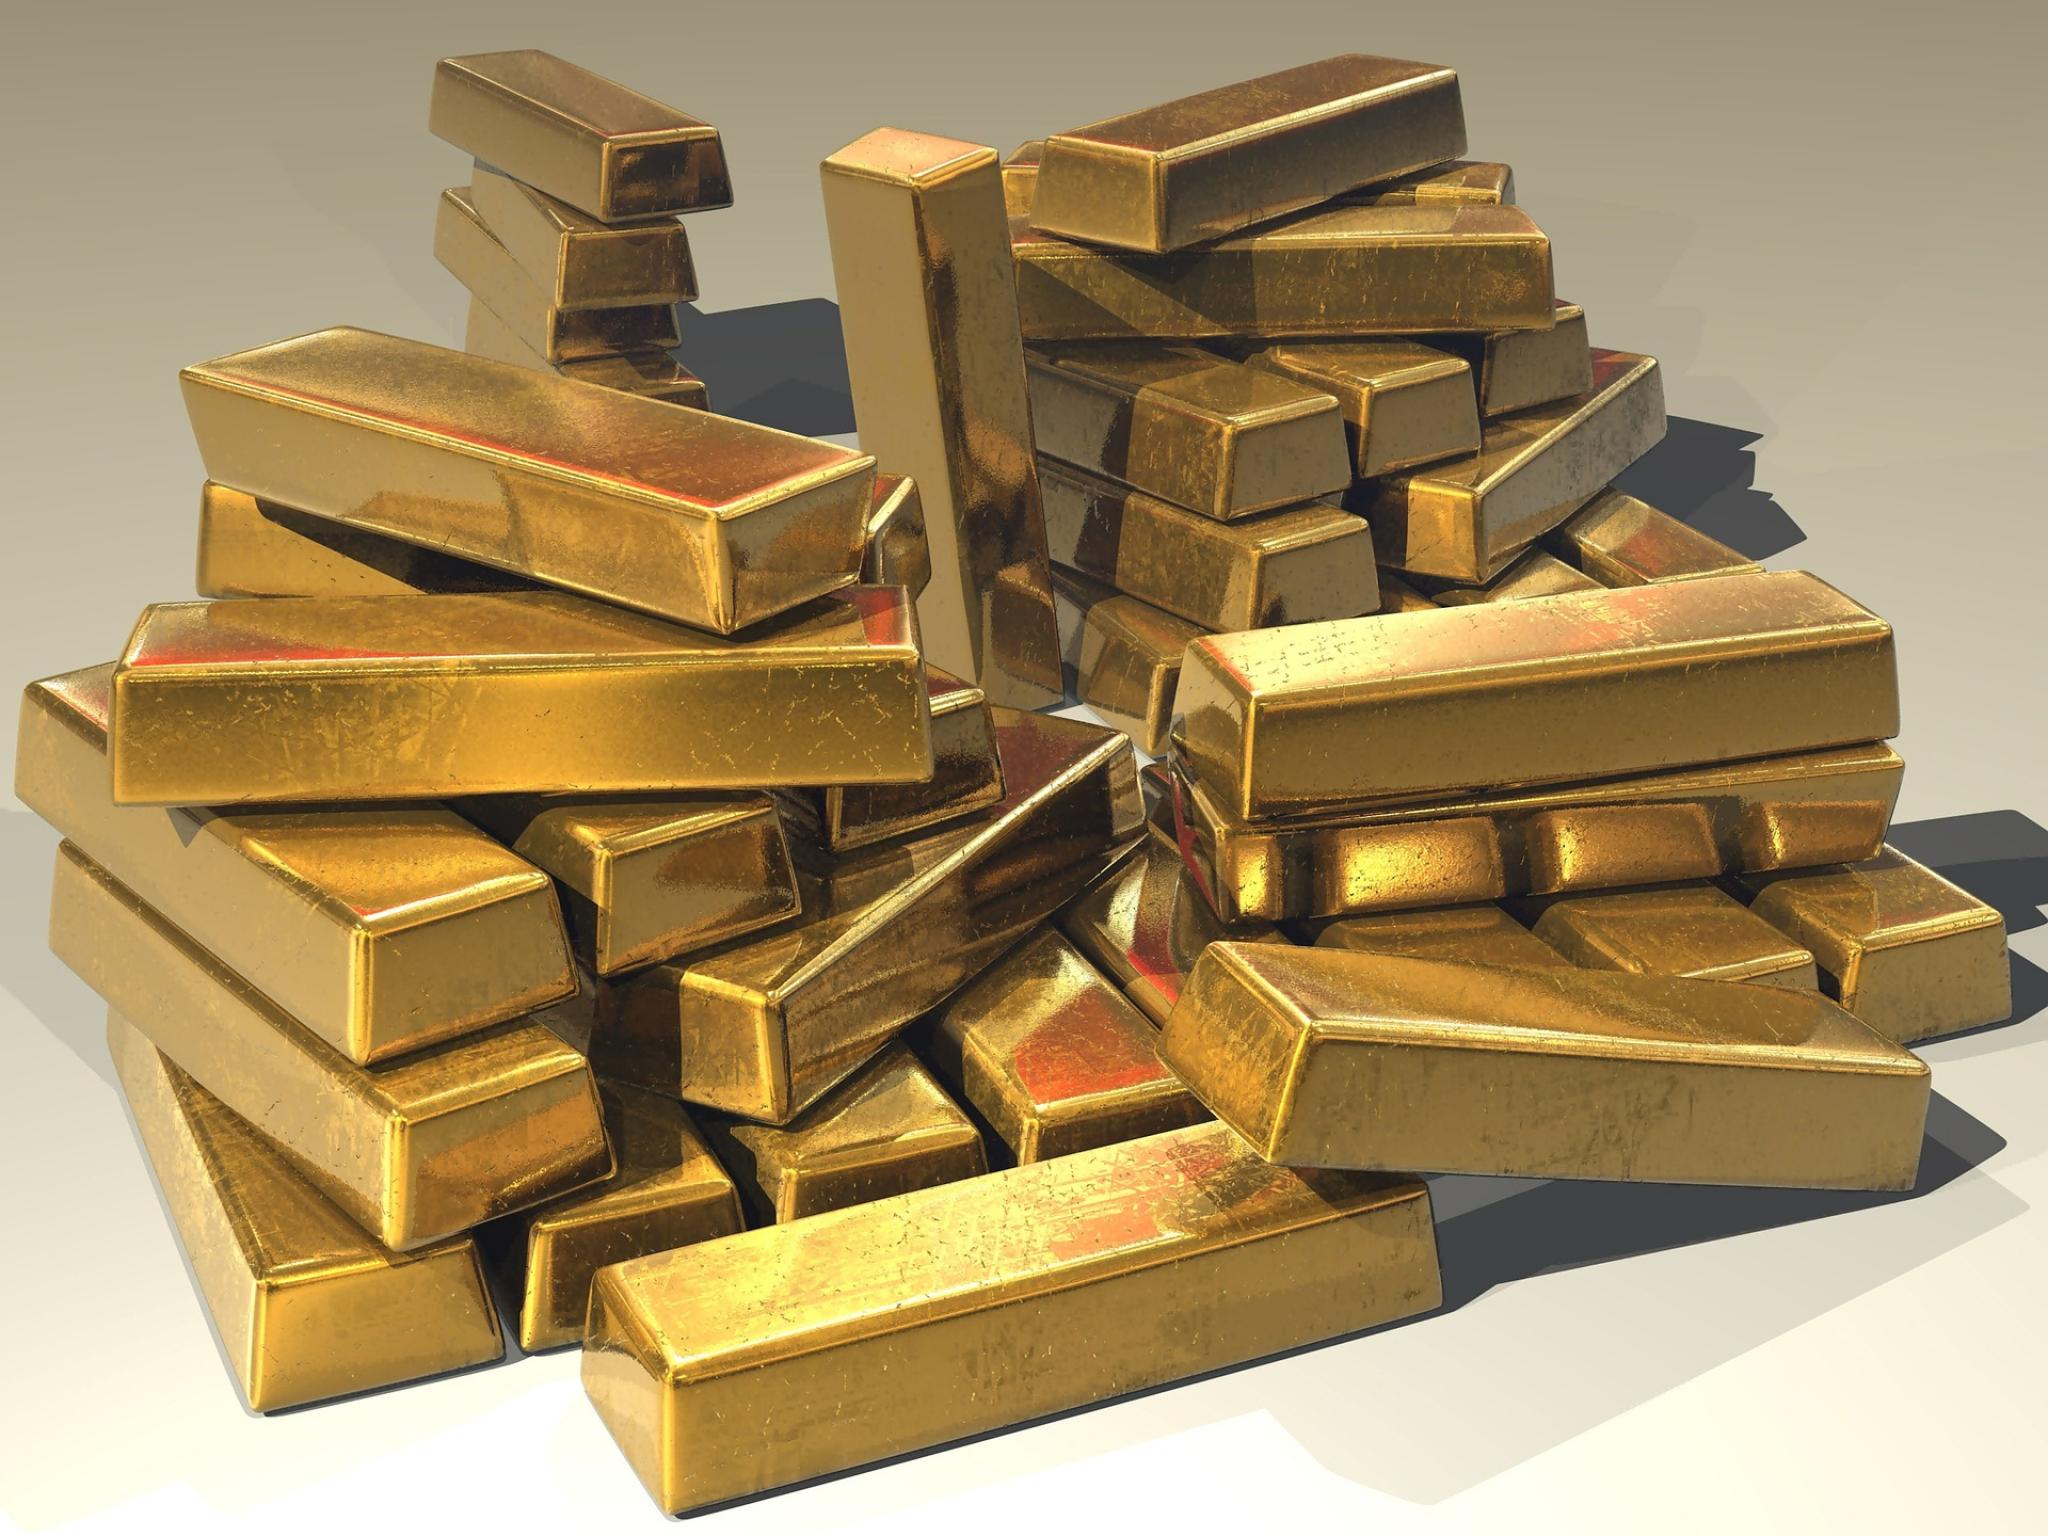  etf-demand-propped-up-gold-in-q3 